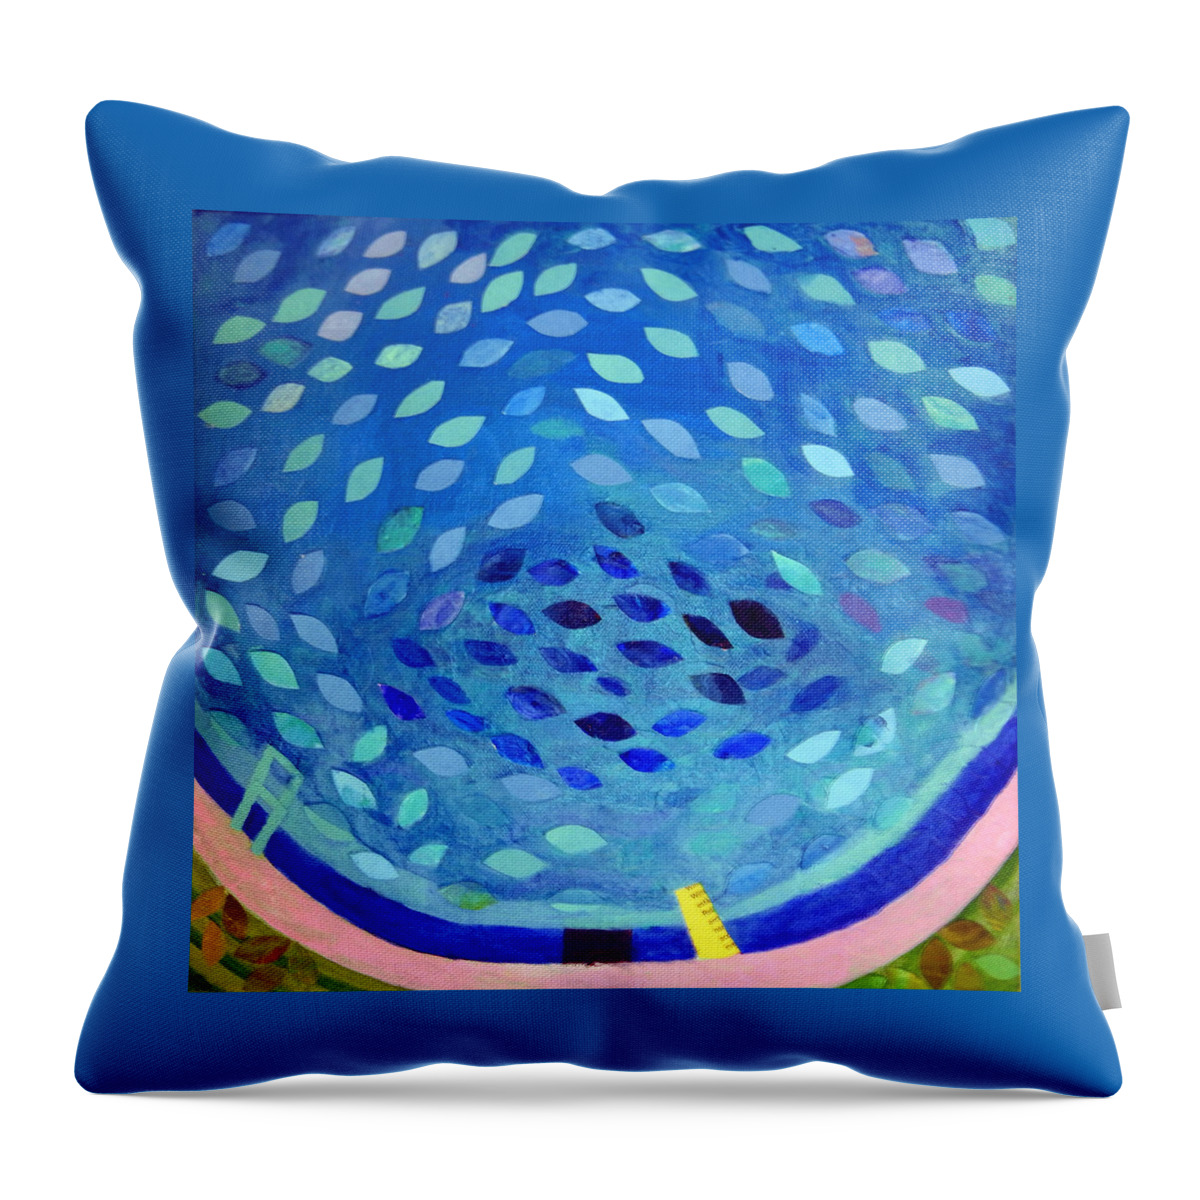 Blue Throw Pillow featuring the photograph Cool Pool by Caroline Blum